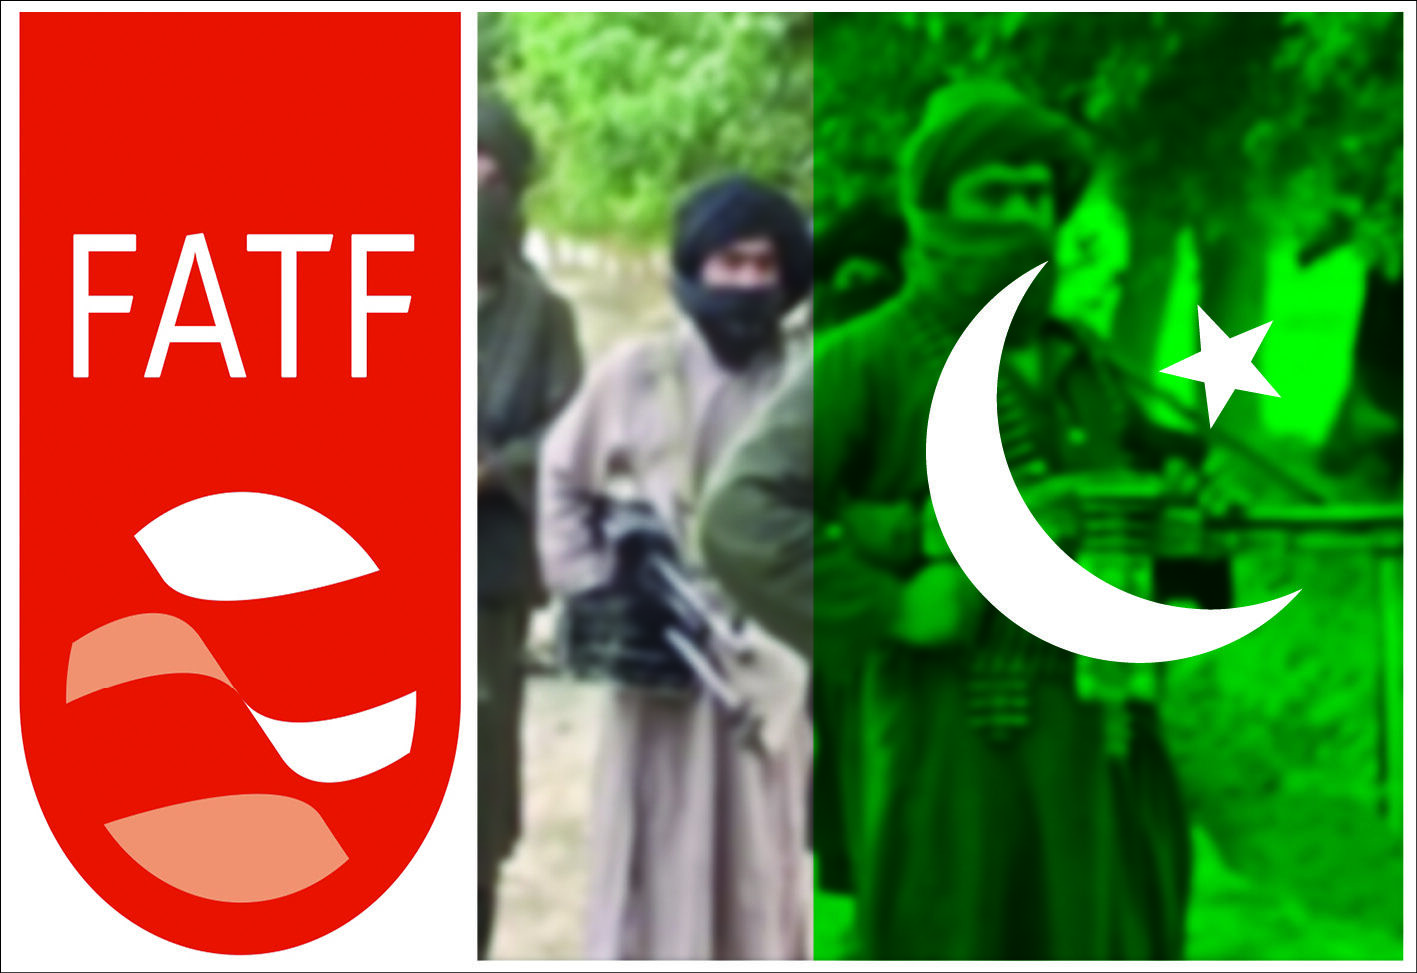 Pakistans FATF exit justified?